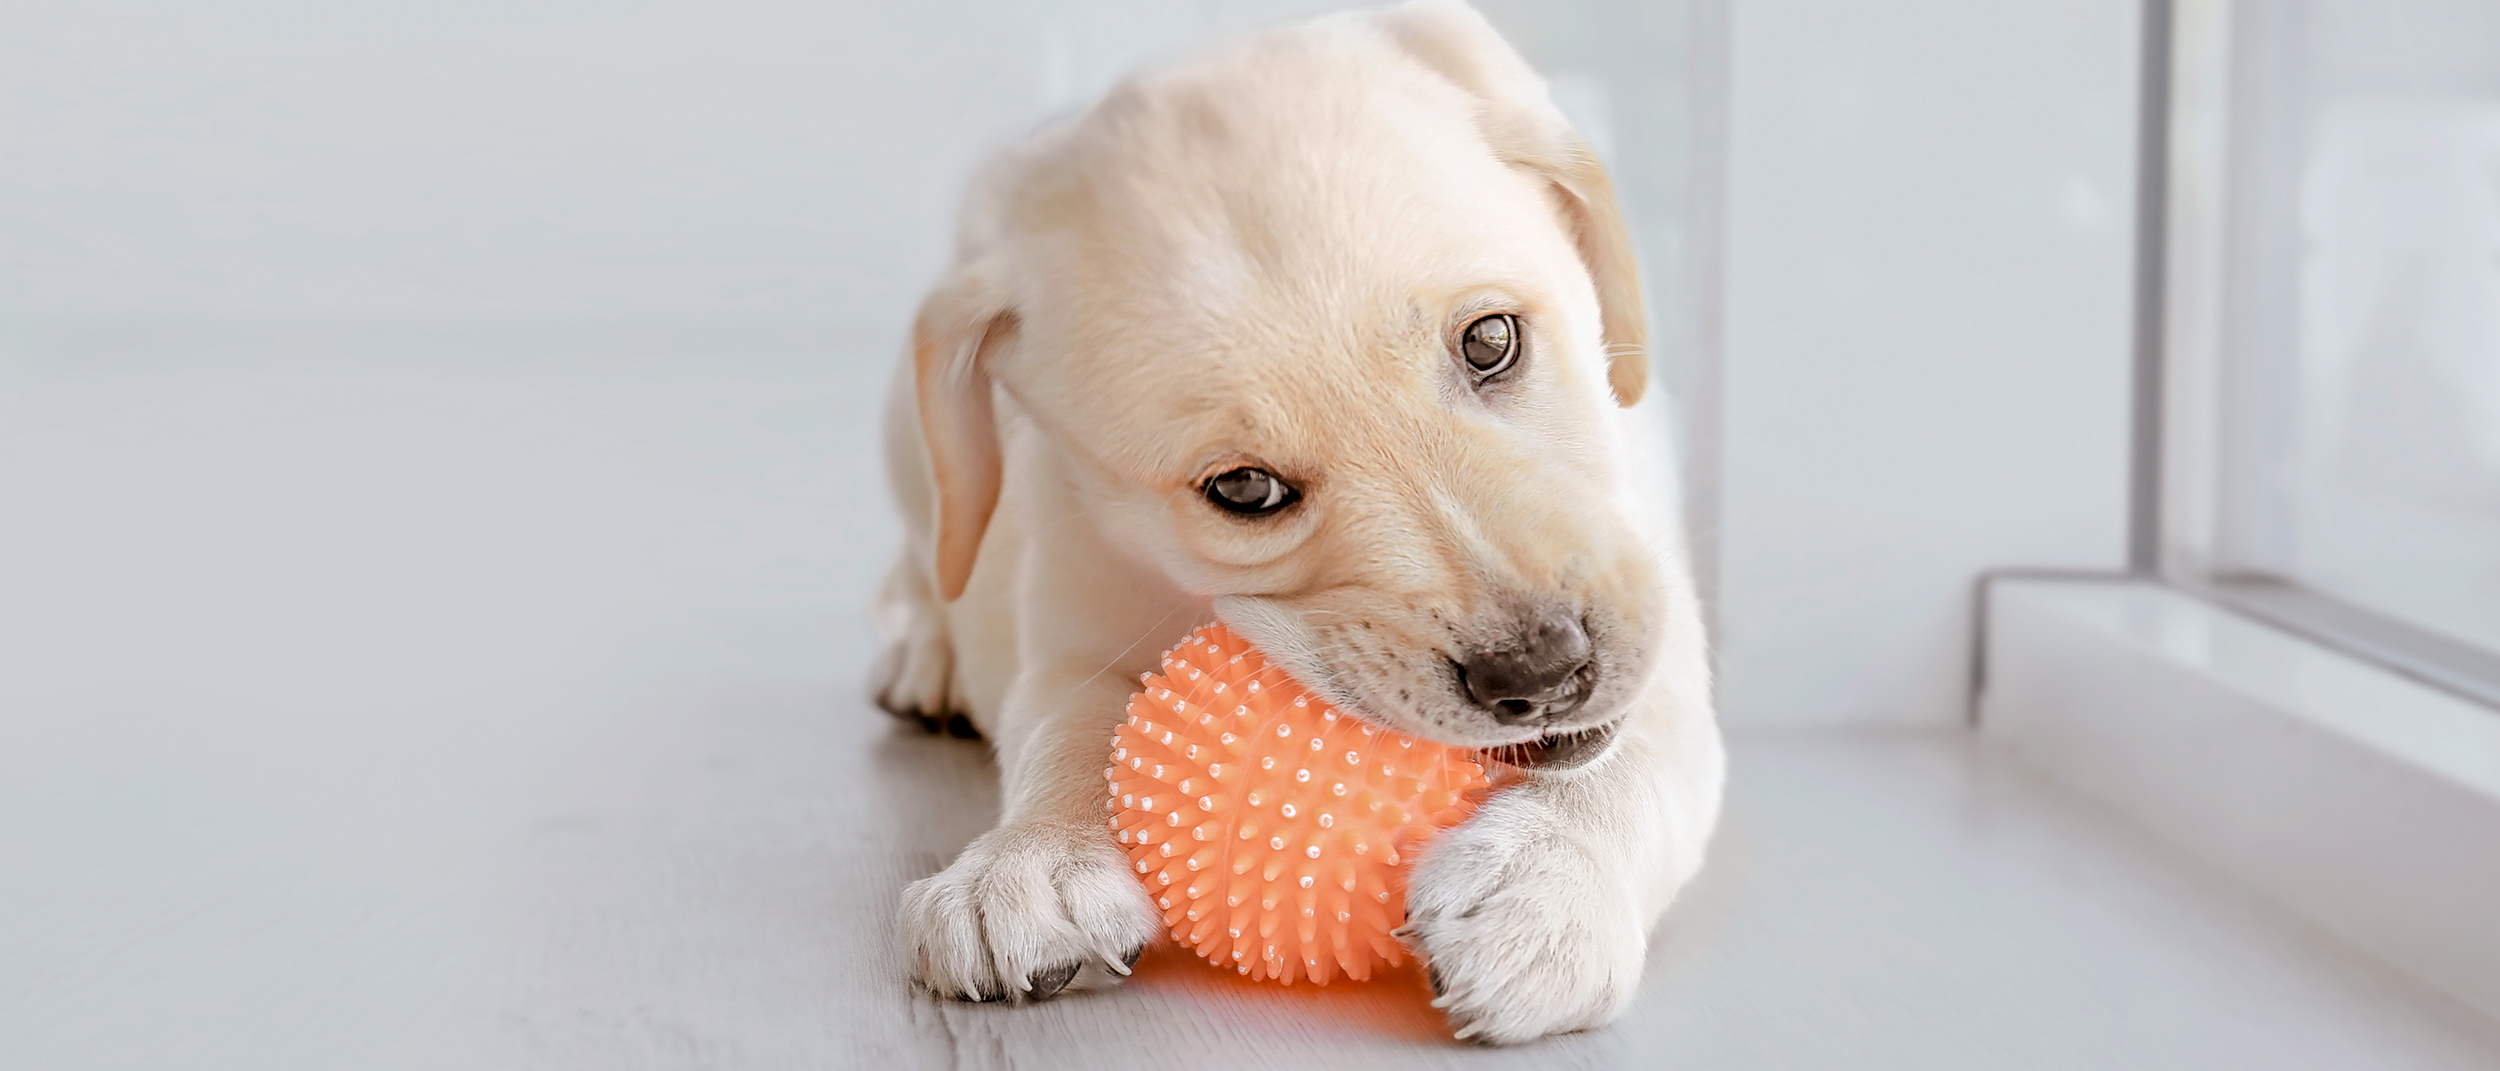 Puppy Labrador Retriever lying down on a wooden floor and chewing a ball.